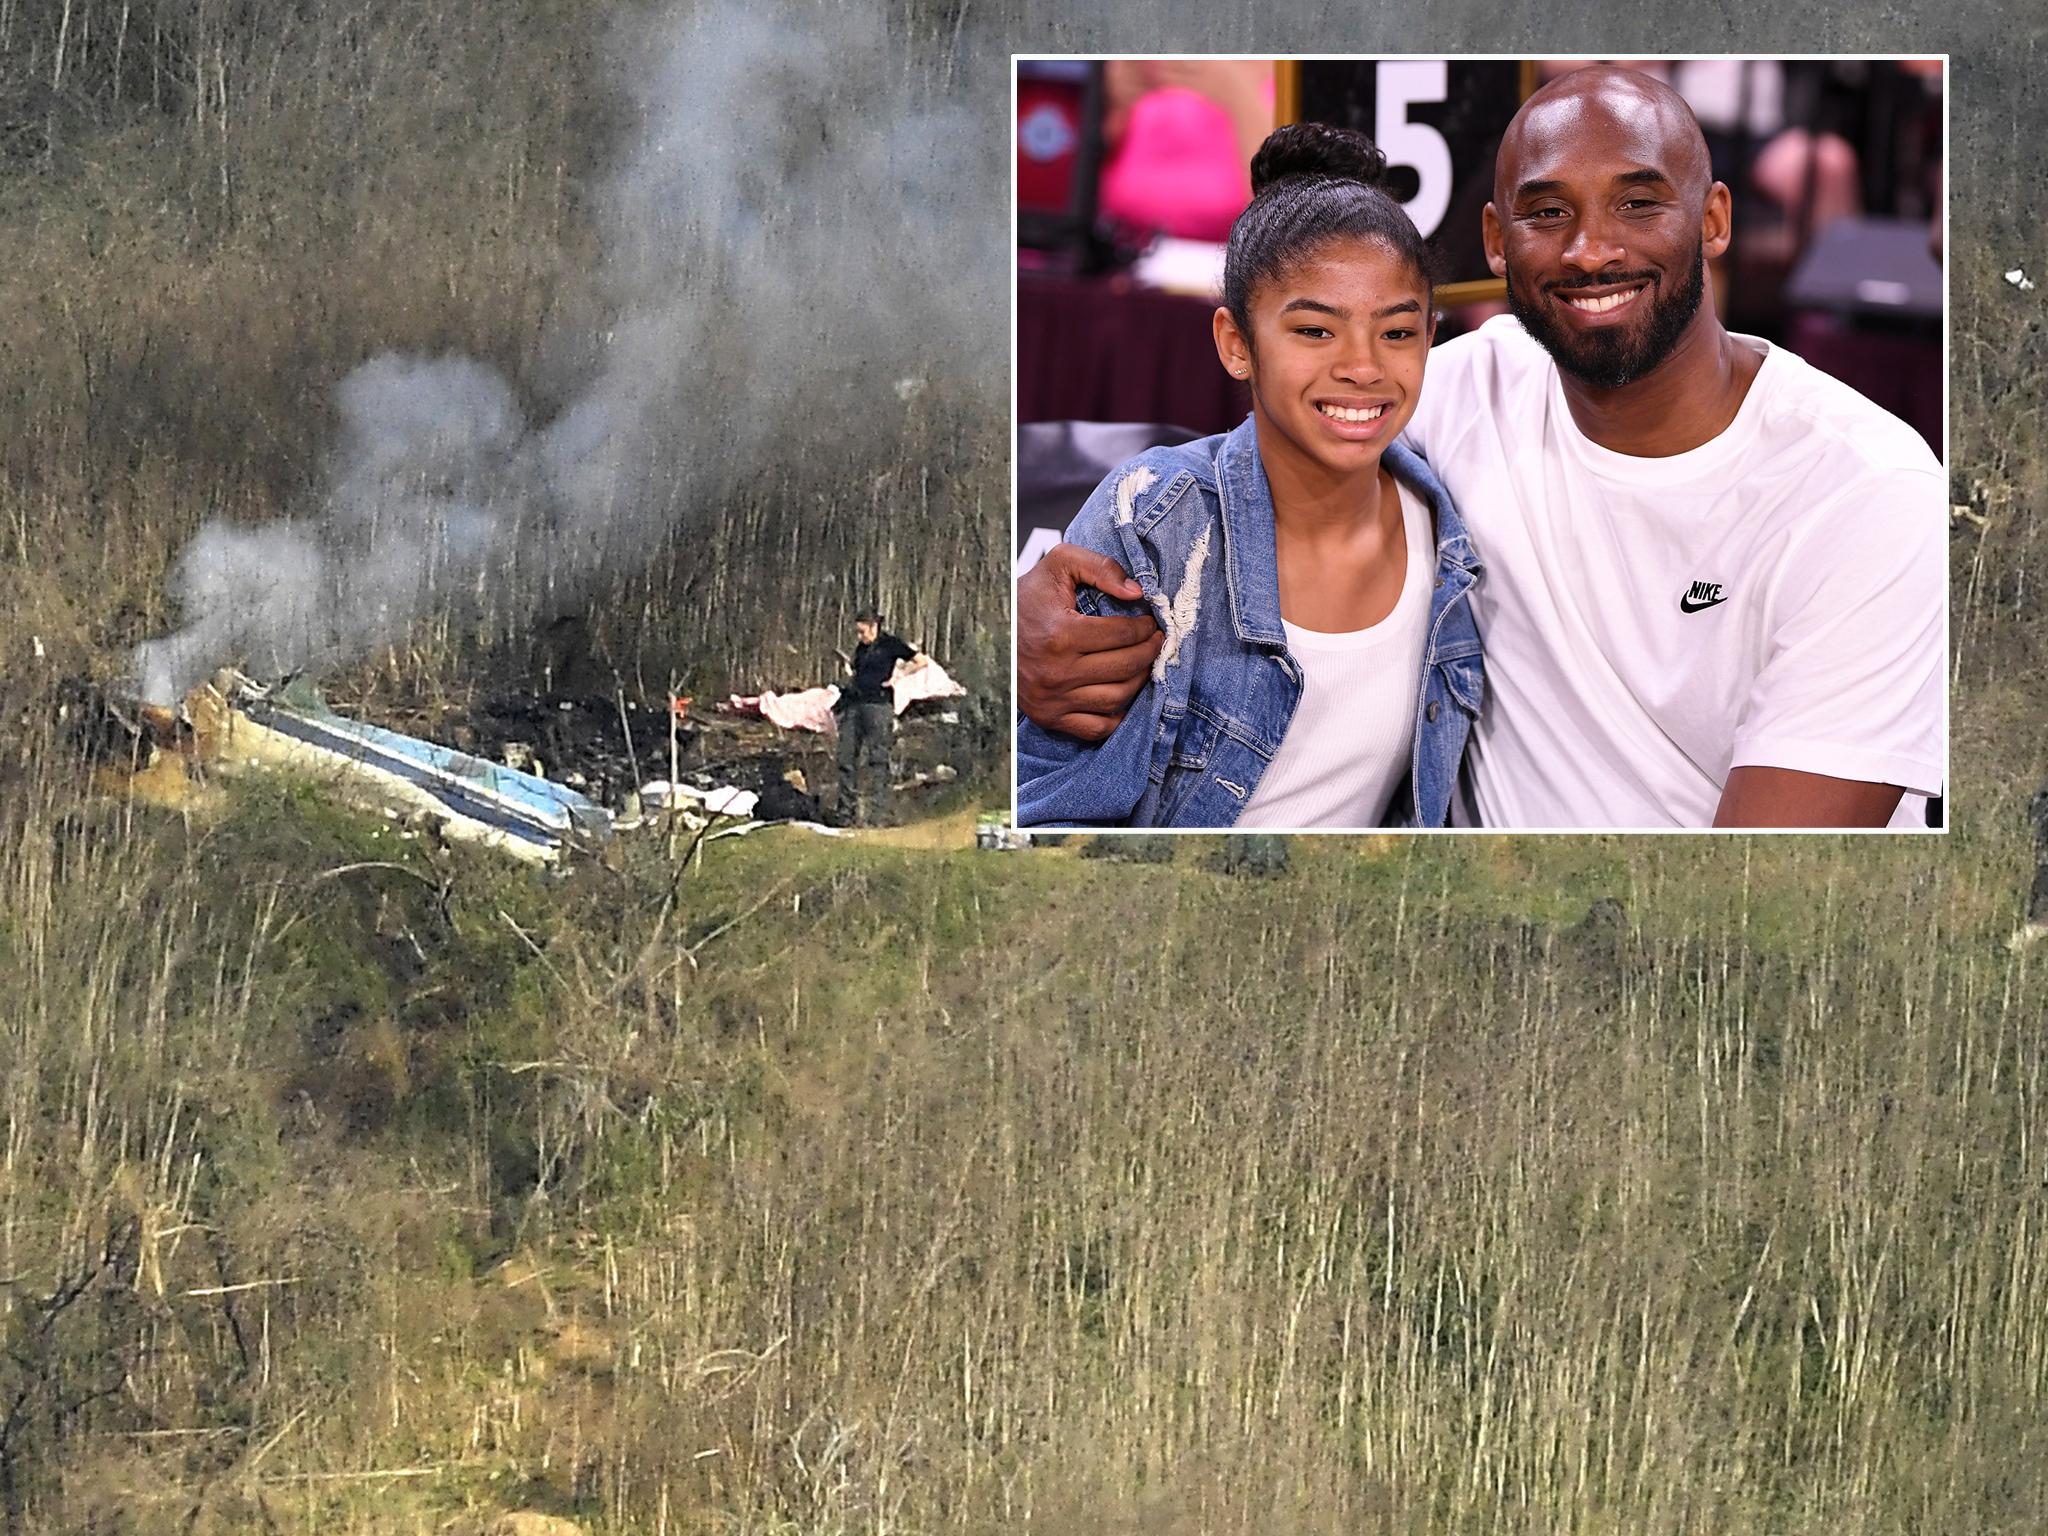 Kobe Bryant death: Helicopter pilot received special clearance to fly despite severe weather conditions